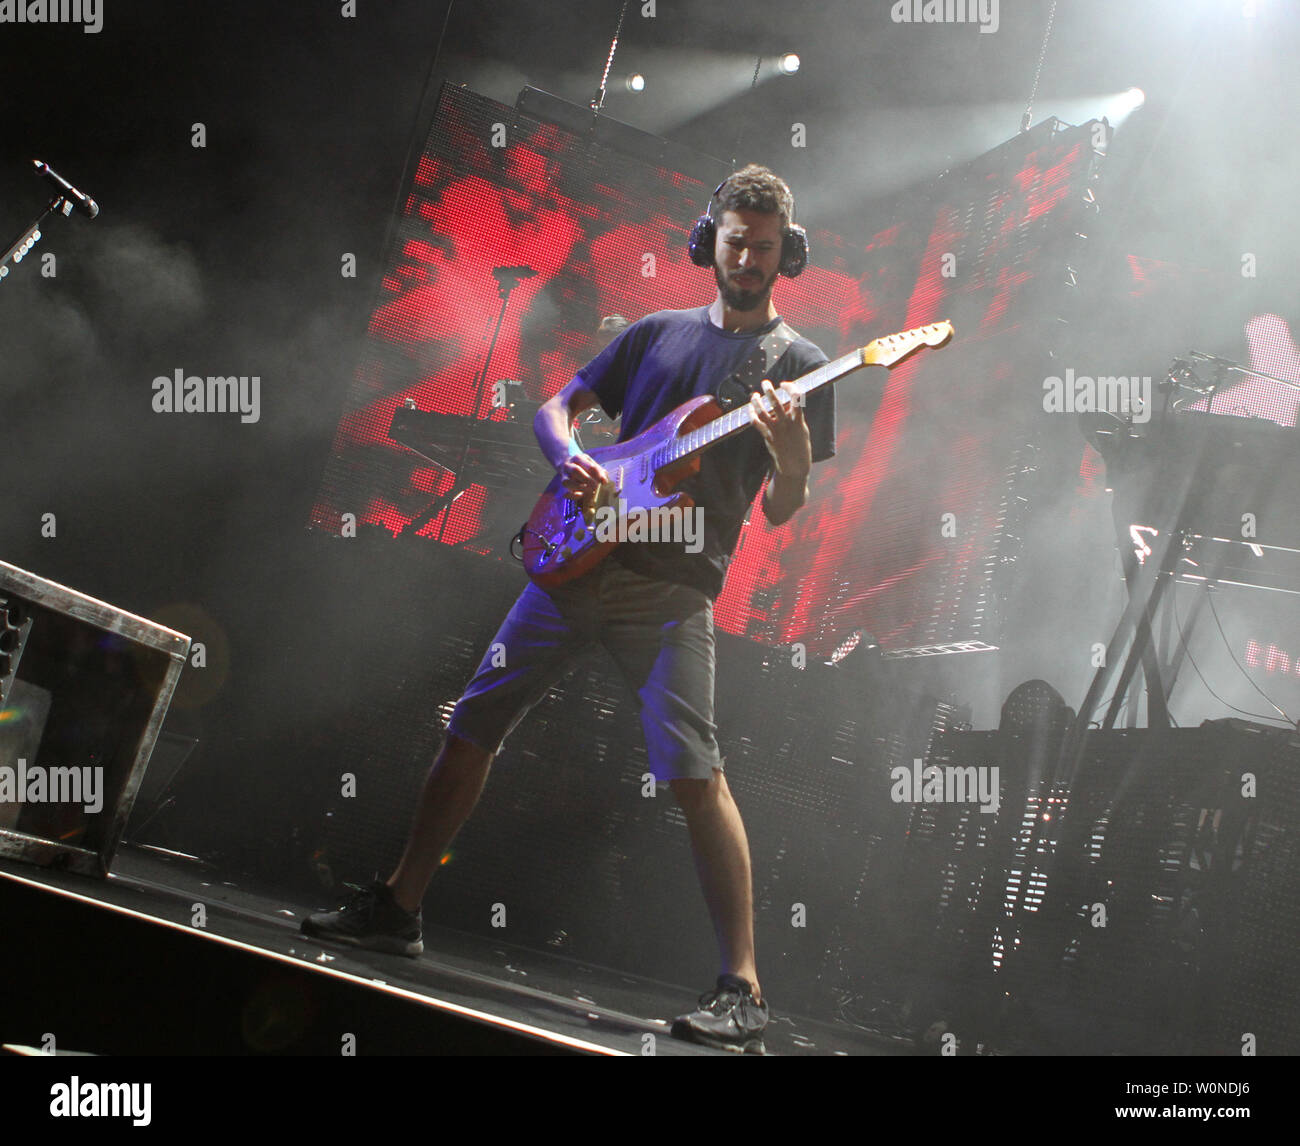 Brad Delson with Linkin Park performs on the opening night of their tour at the Cruzan Amphitheatre in West Palm Beach, Florida on August 8, 2014. UPI/Michael Bush Stock Photo